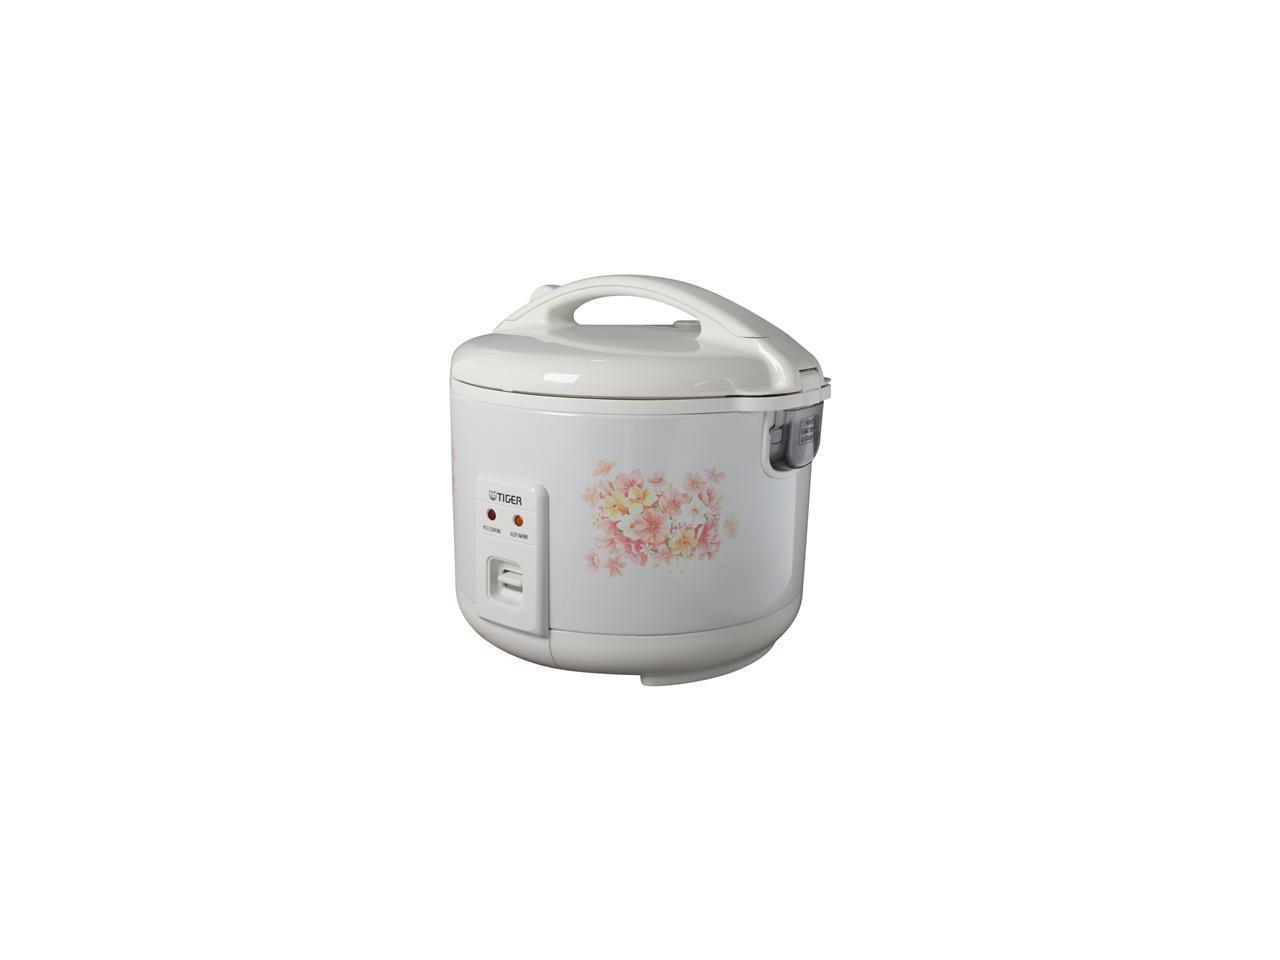 Tiger Brand Rice Cooker Made In Japan Pic Future